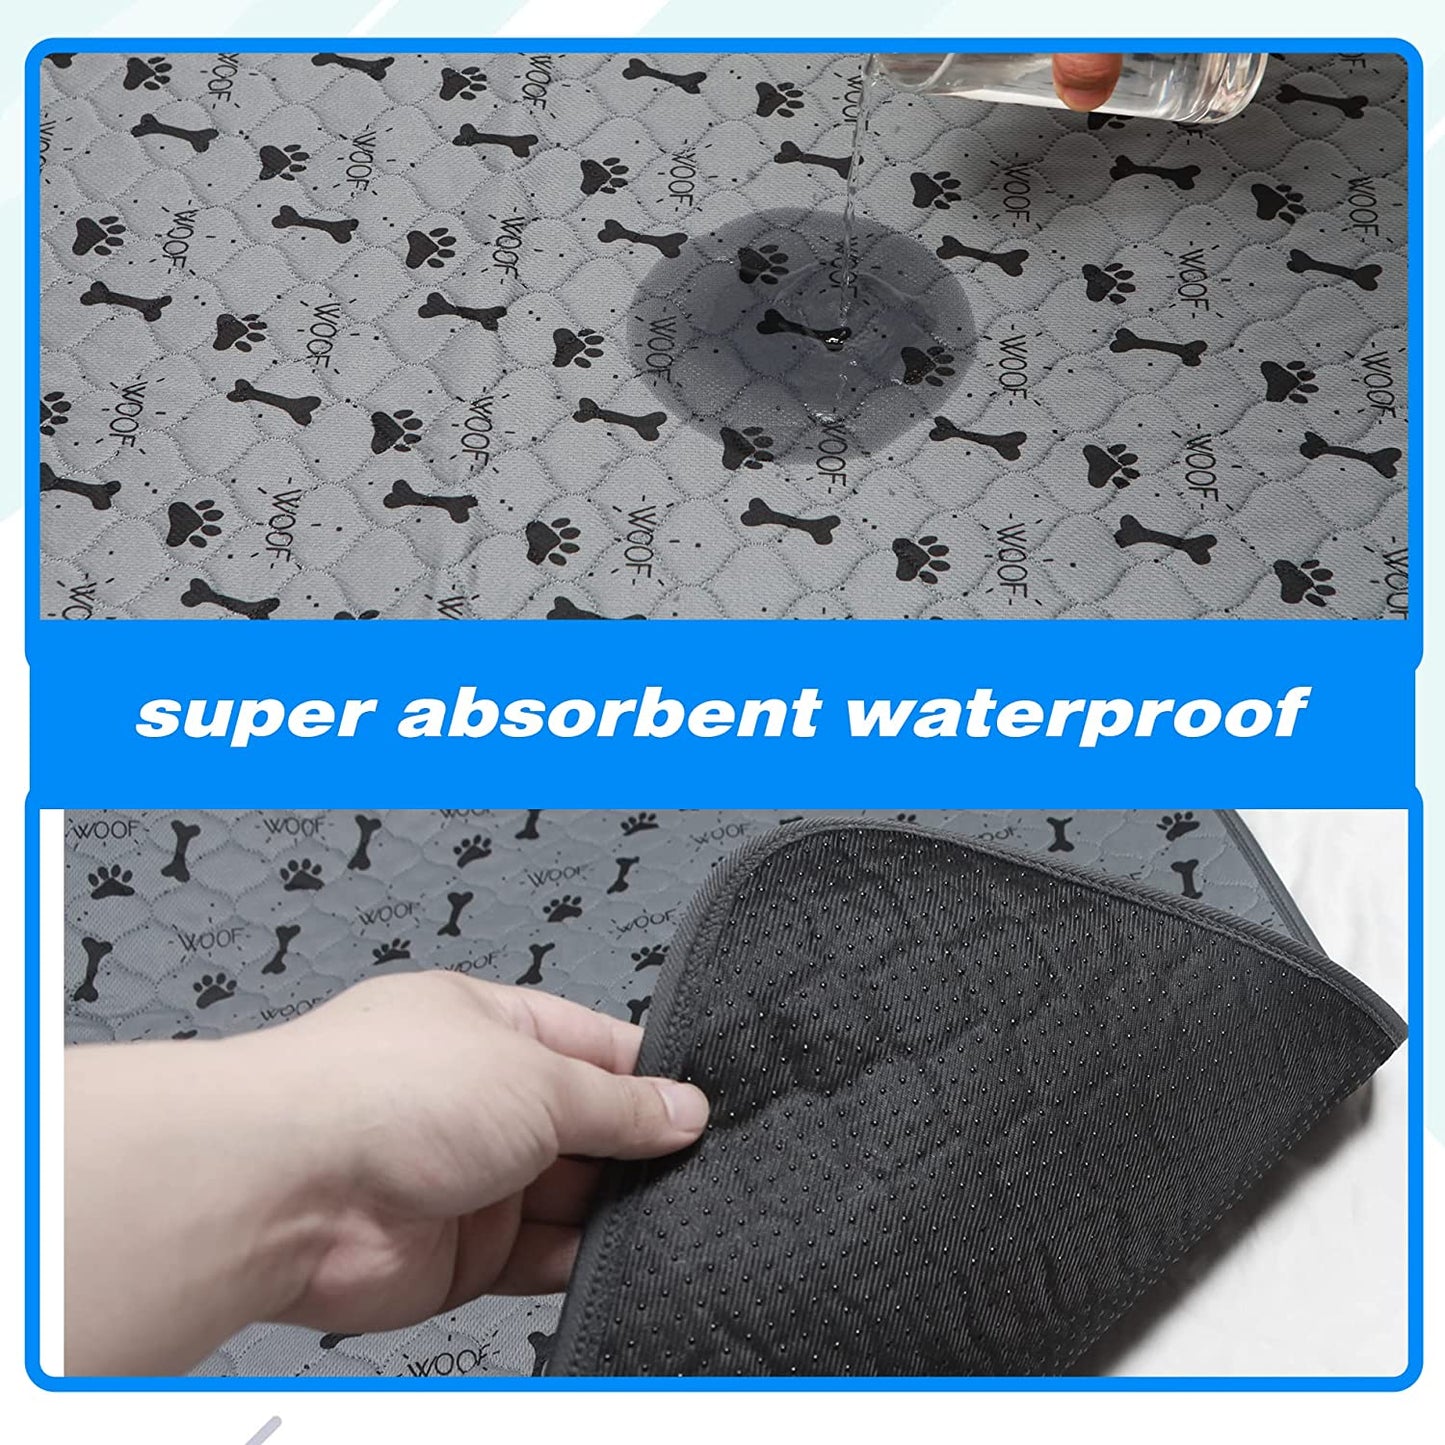 Reusable Pet Training Pads, Washable Puppy Pee Pads with Fast Absorption, Waterproof and Non-Slip Protective Pads for Dog Training and Fences - 2 Pack of 24x24 inches